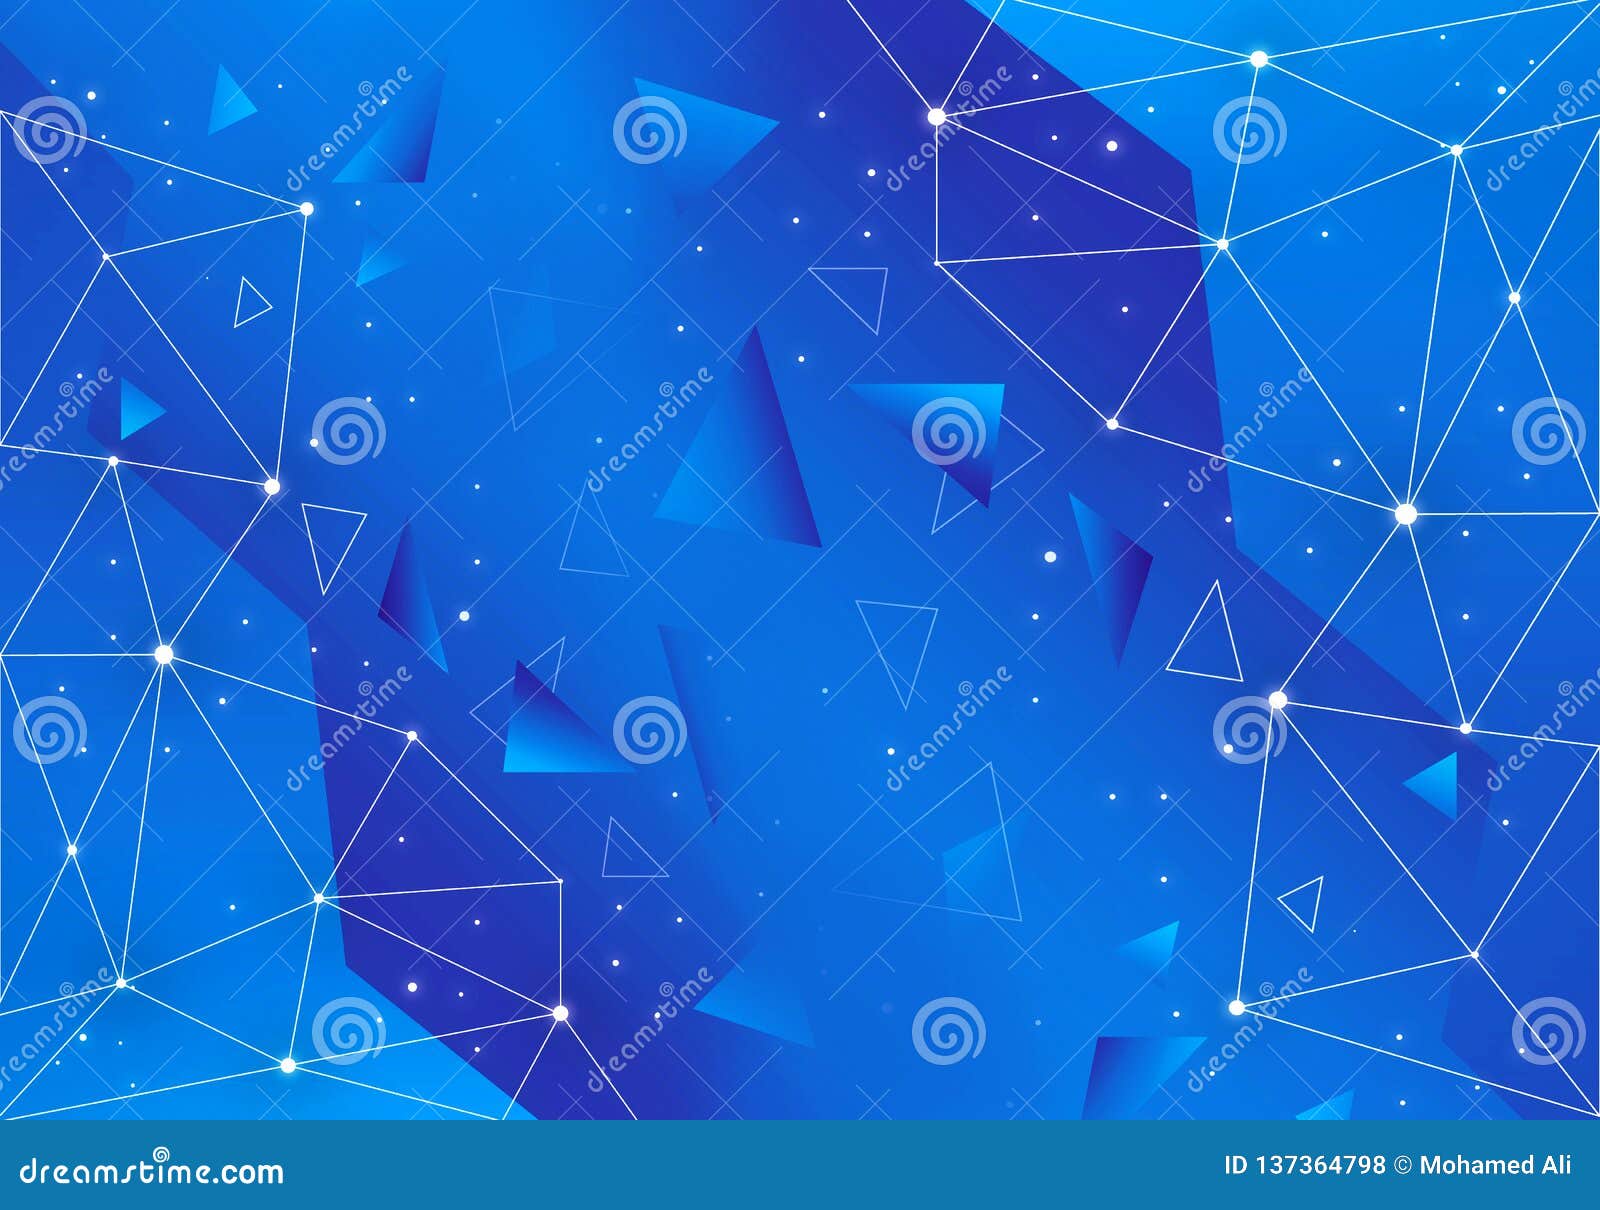 Abstract Artistic Unique Geometric Network On A Blue Background Stock ...